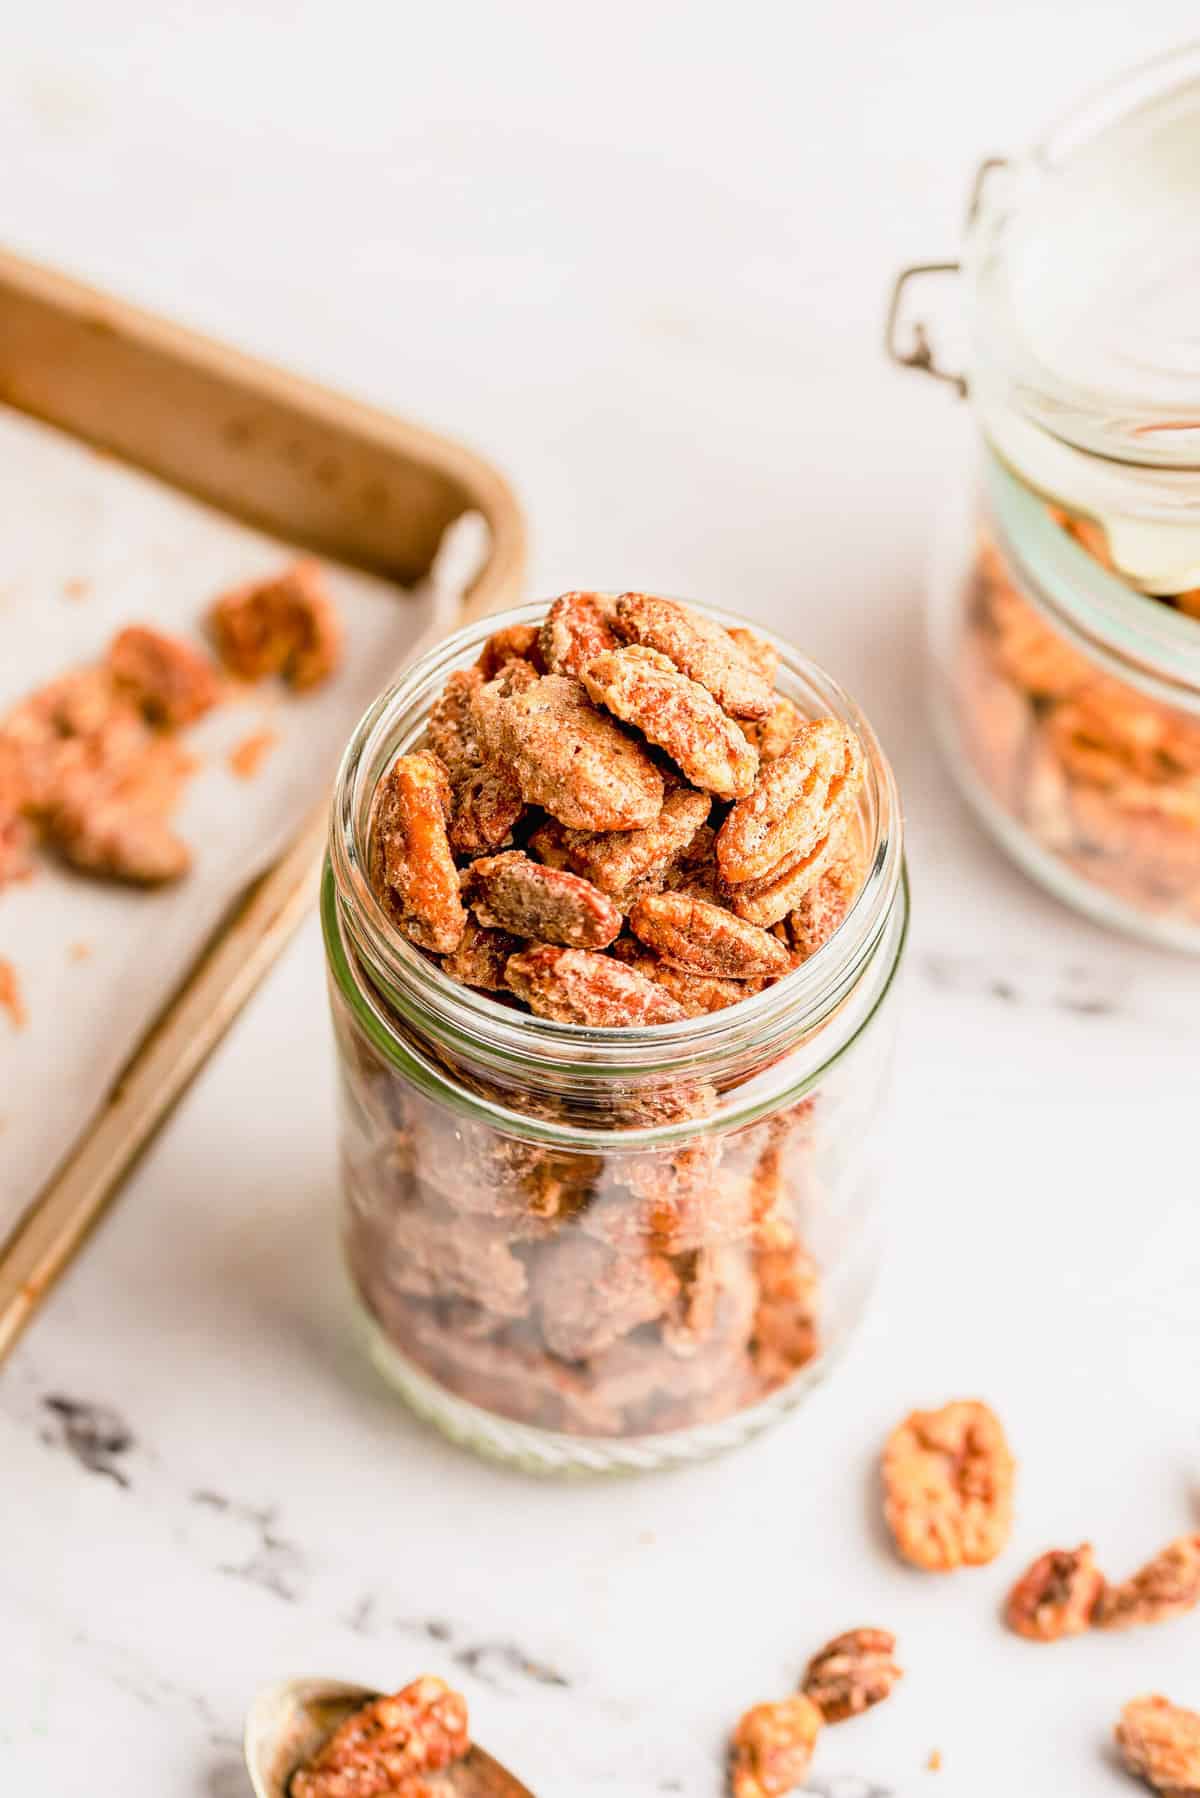 Spiced nuts in glass jar with nuts scattered in foreground